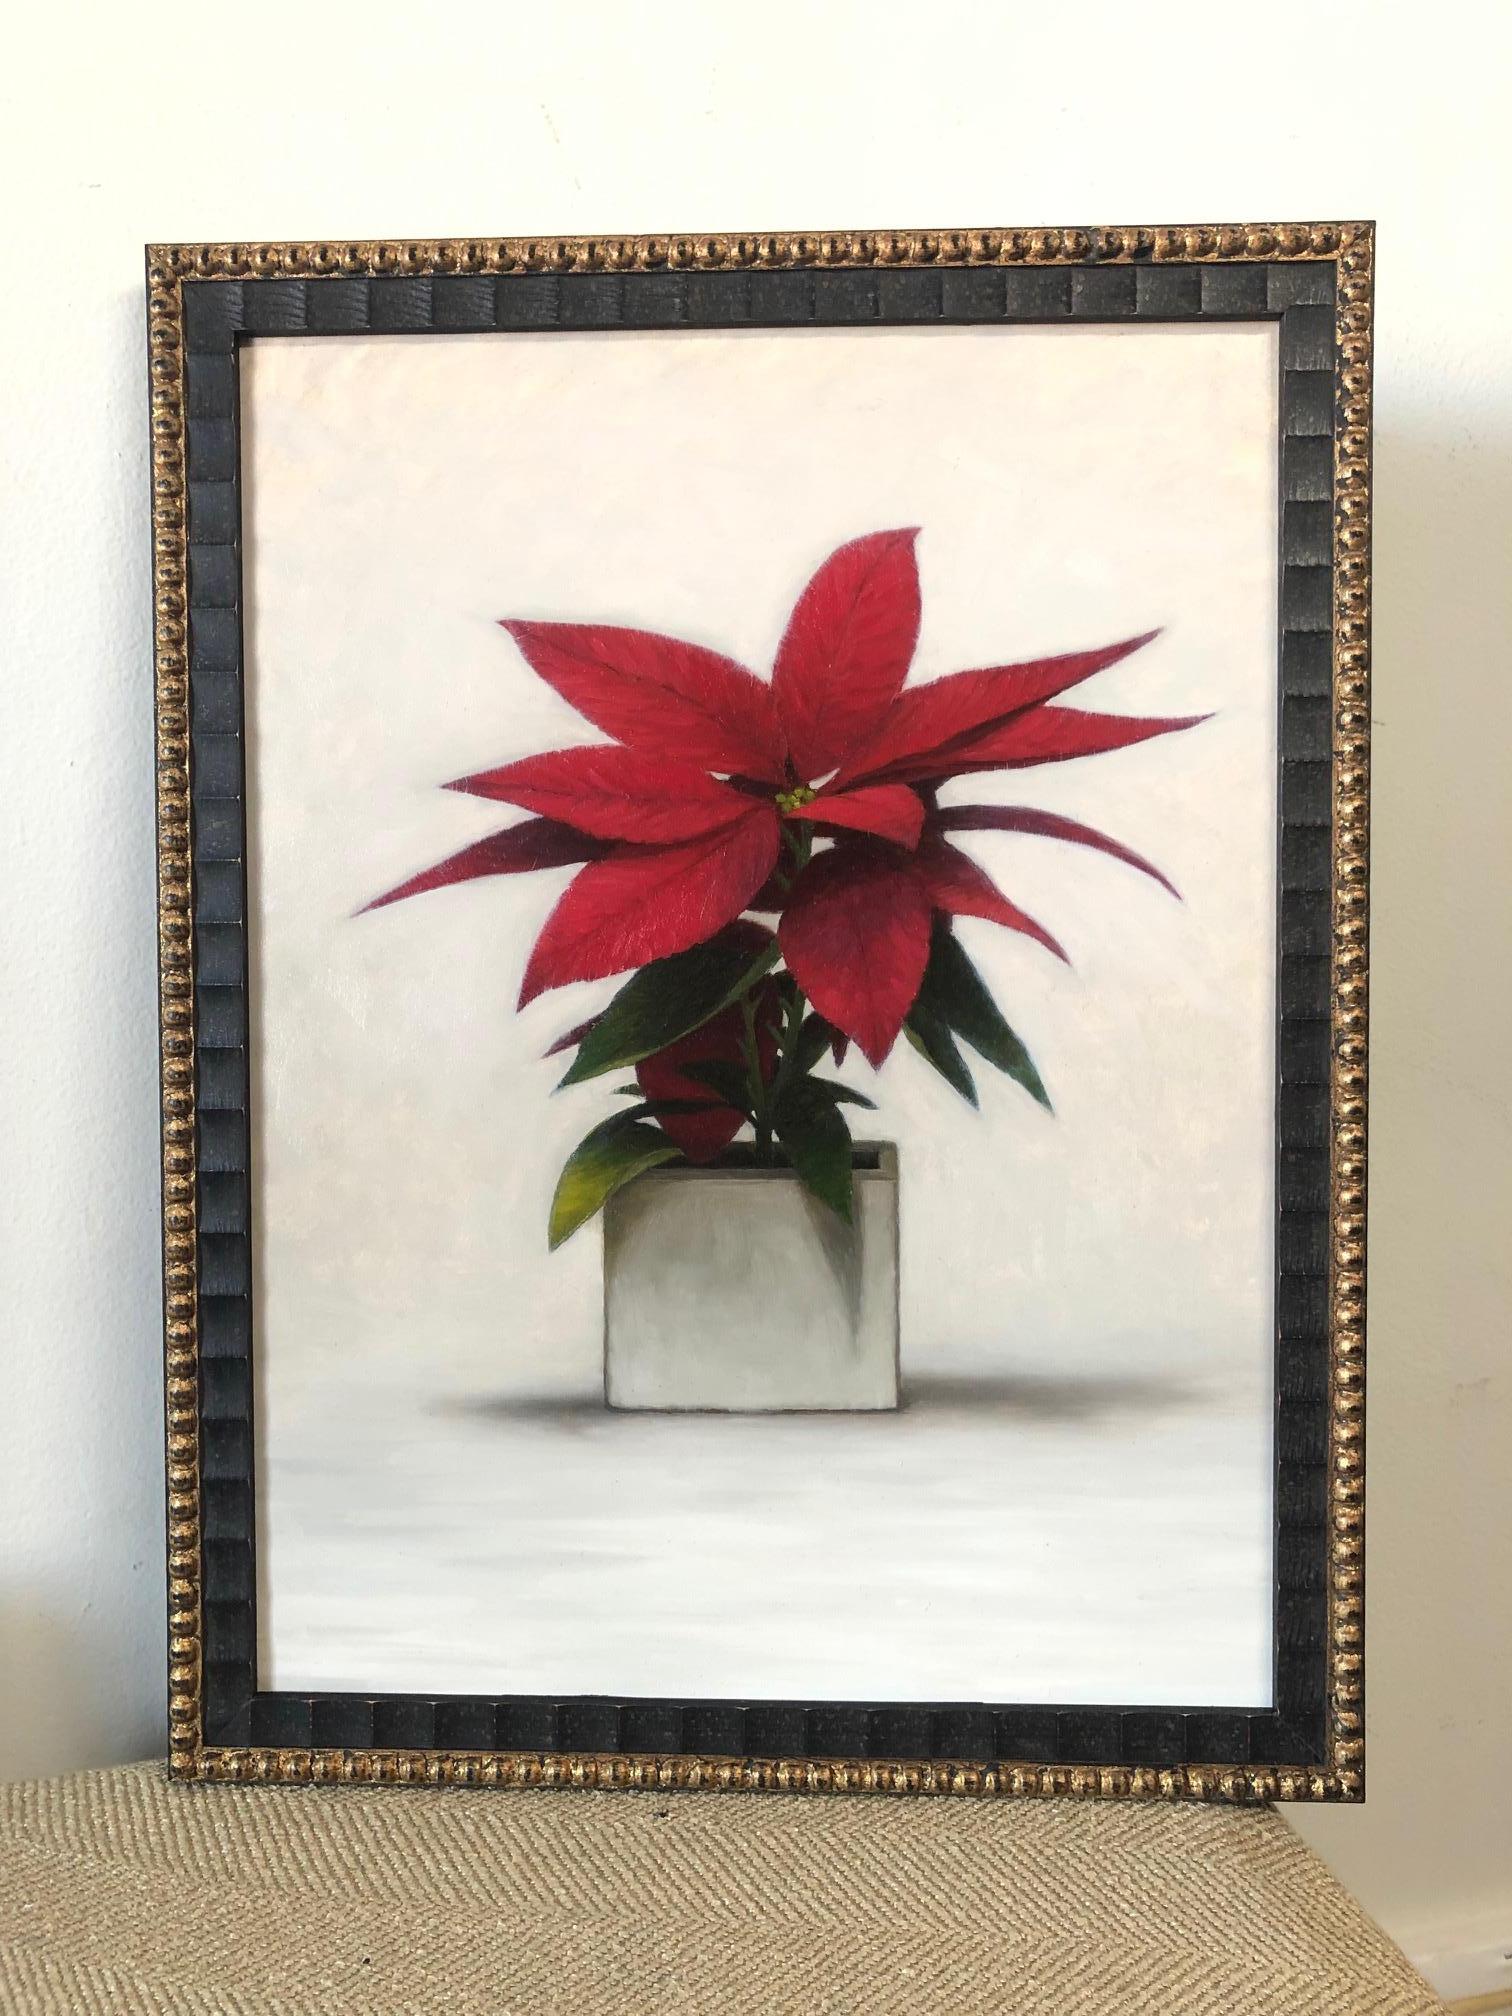 Poinsettia - Painting by Matthew Weigle